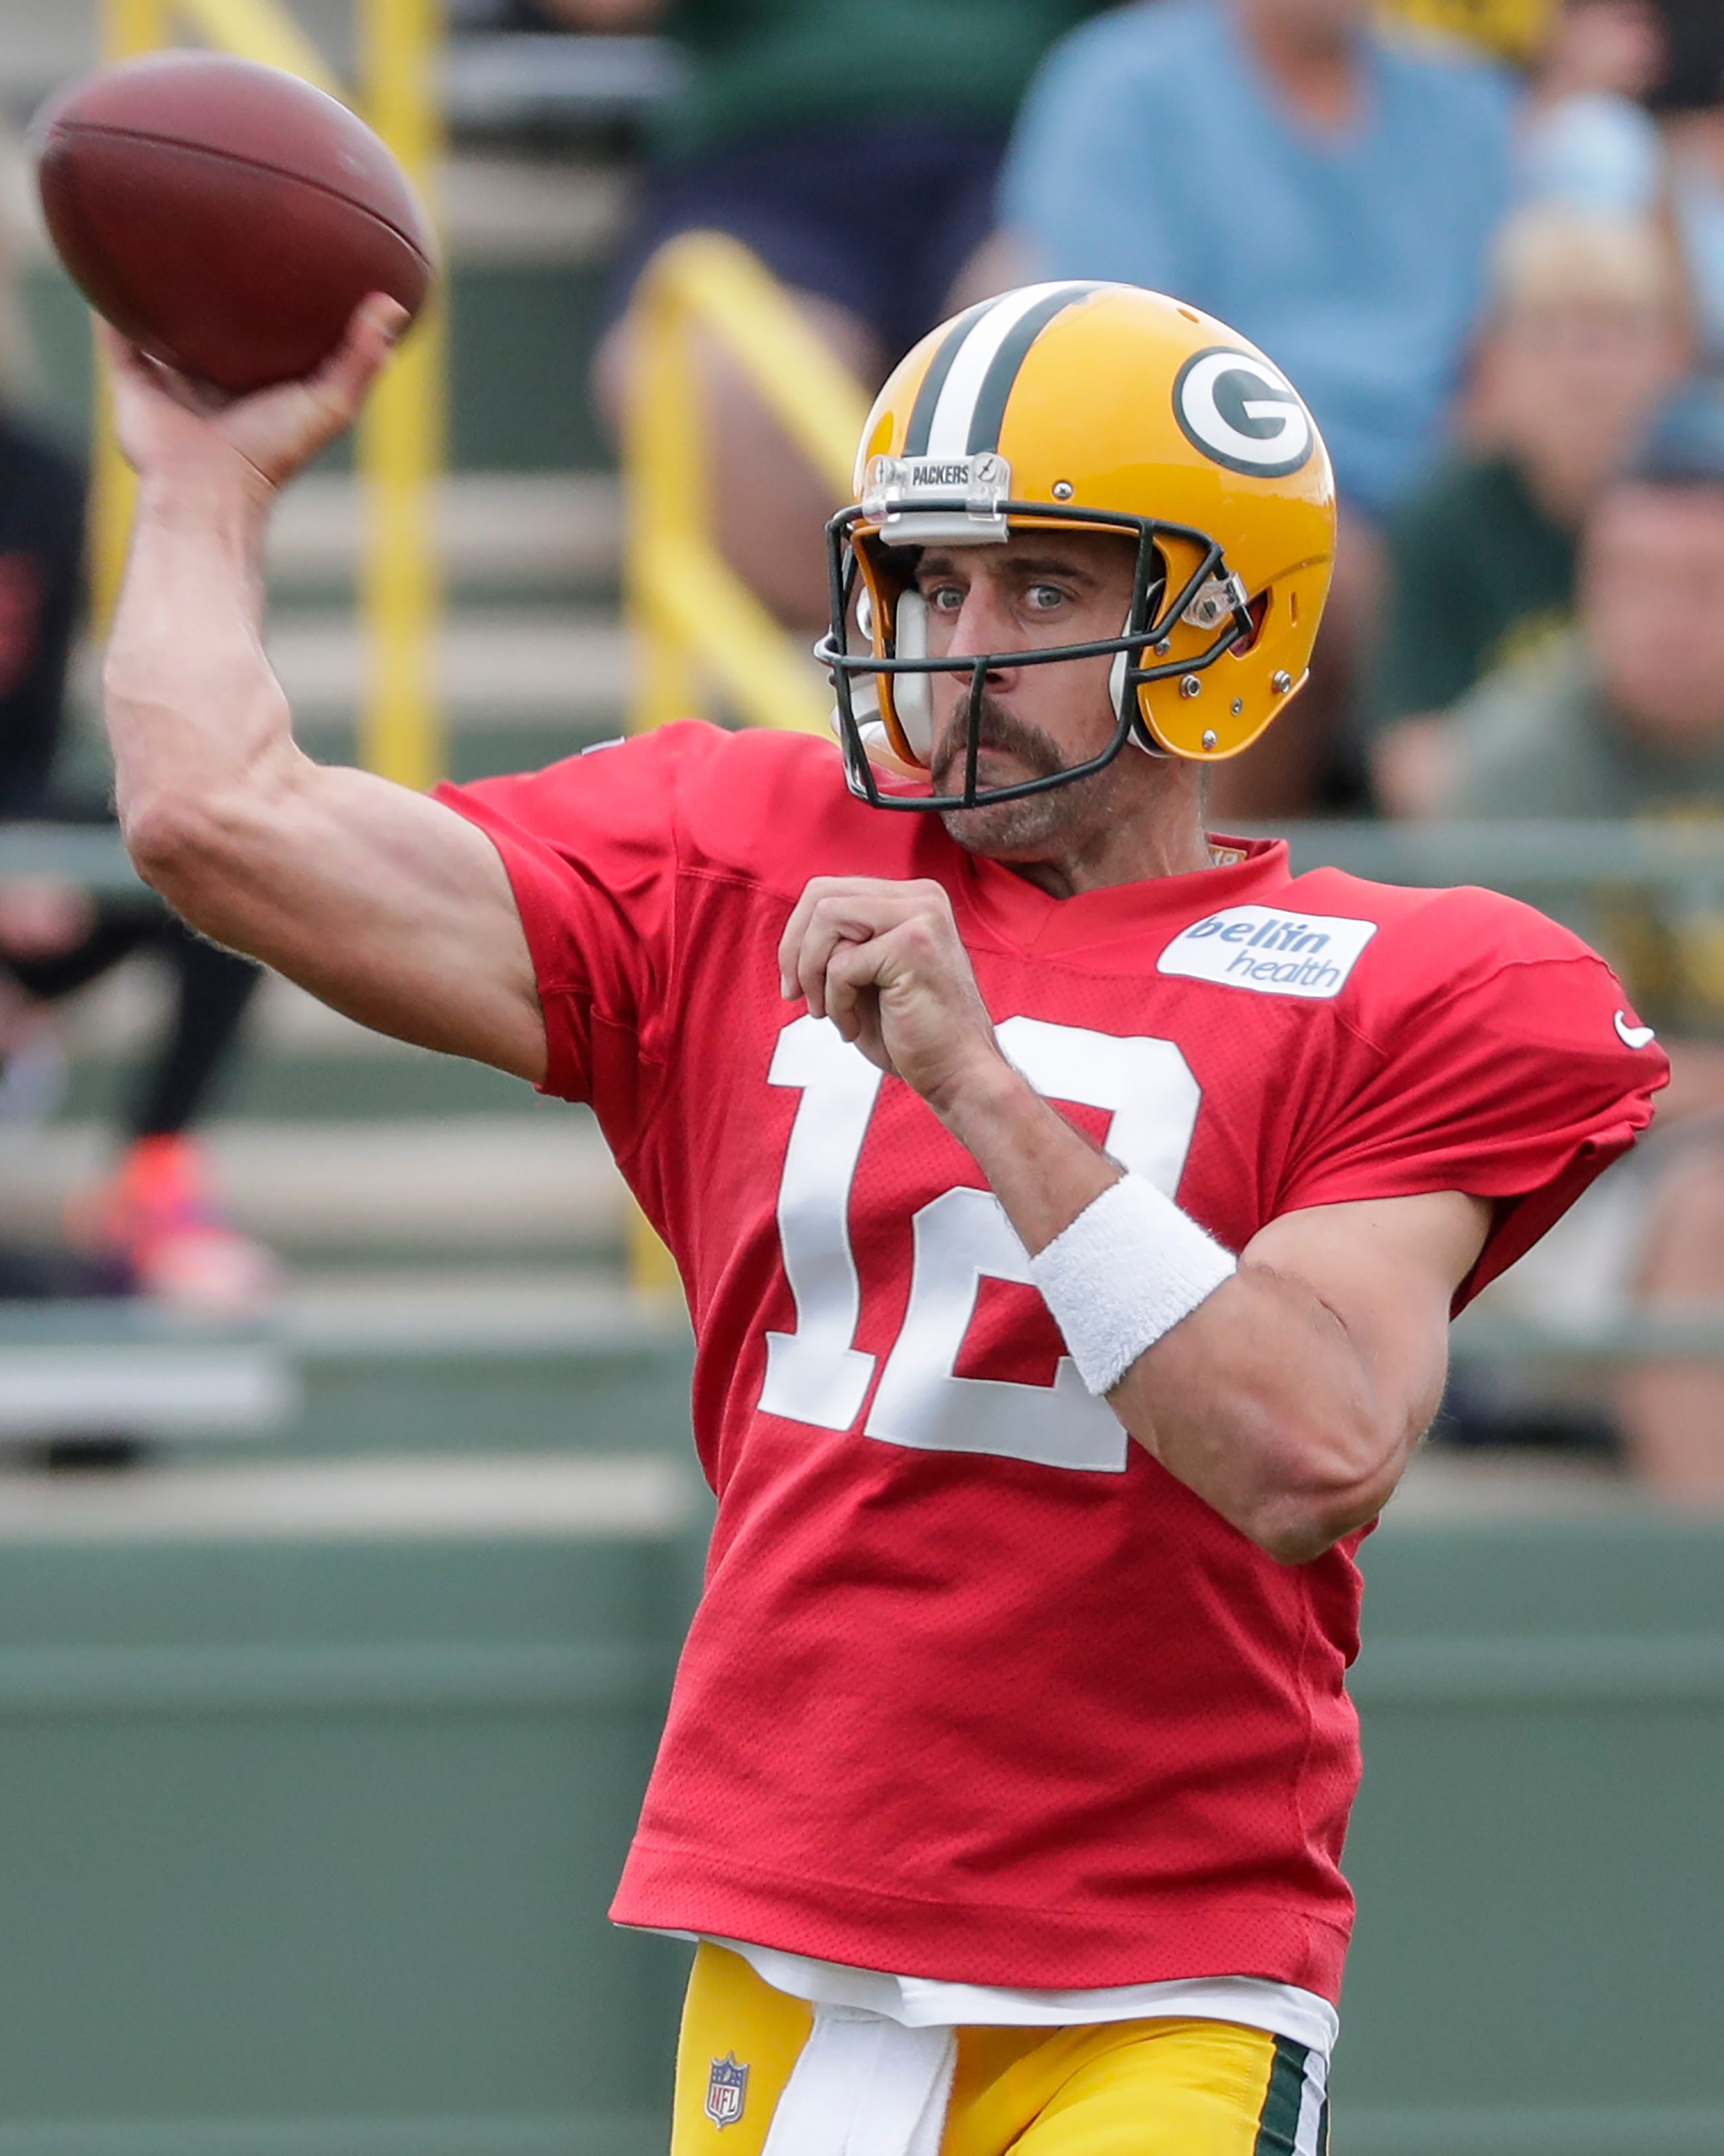 Green Bay Packers' Aaron Rodgers throws during training camp practice Tuesday, August 13, 2019, at Ray Nitschke Field in Ashwaubenon, Wis.